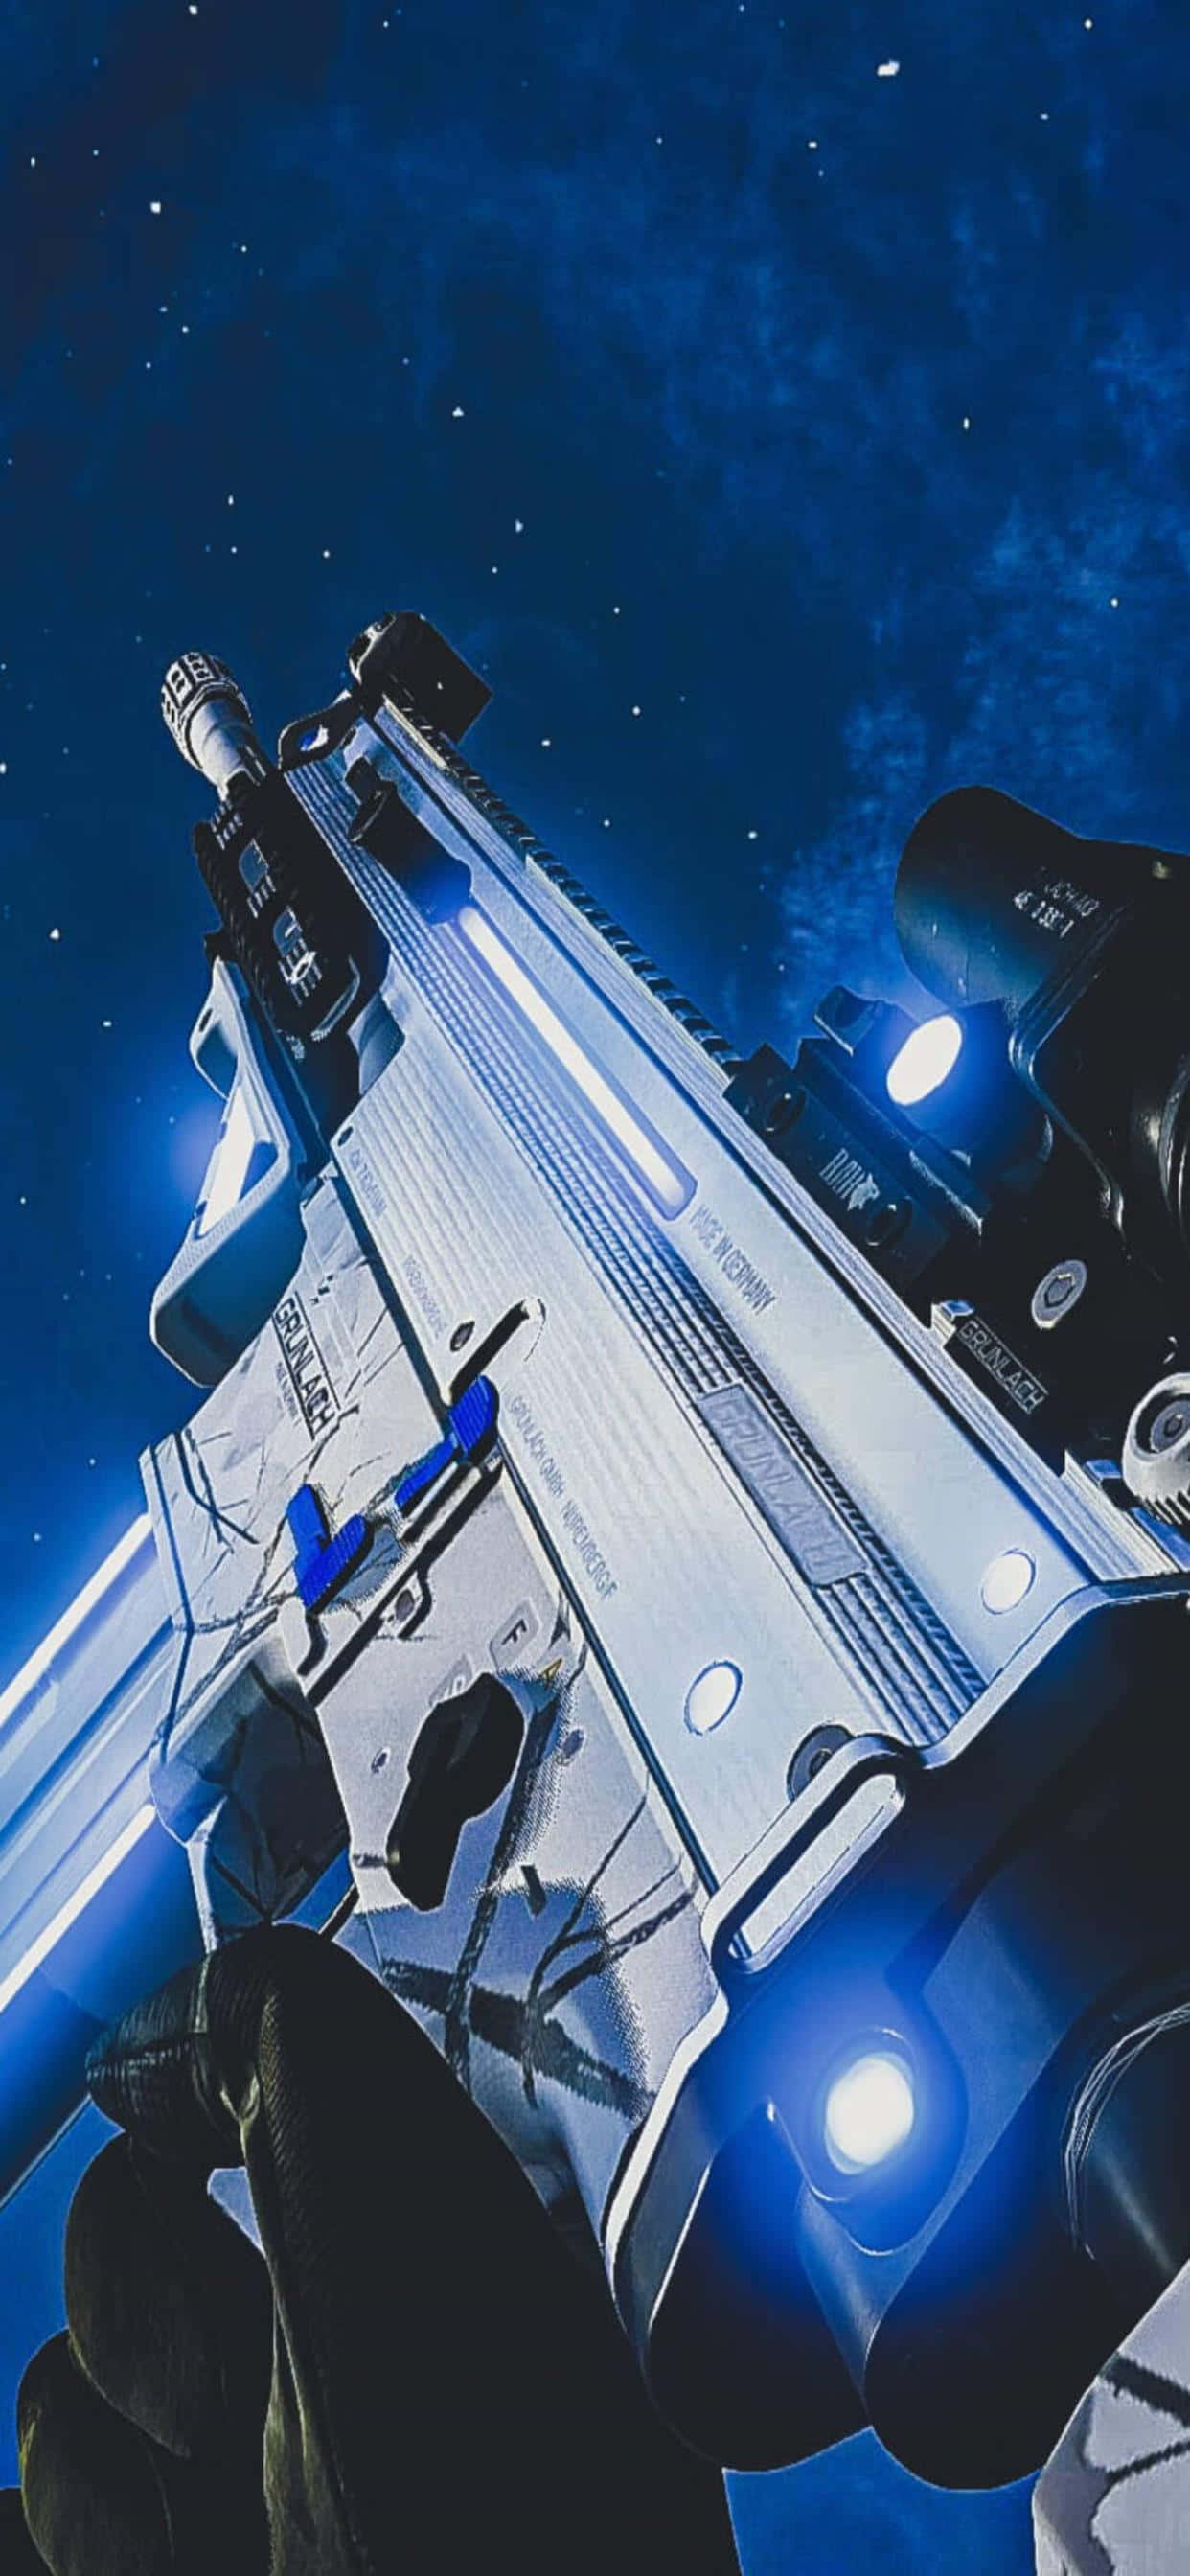 A Gun With Blue Lights In The Sky